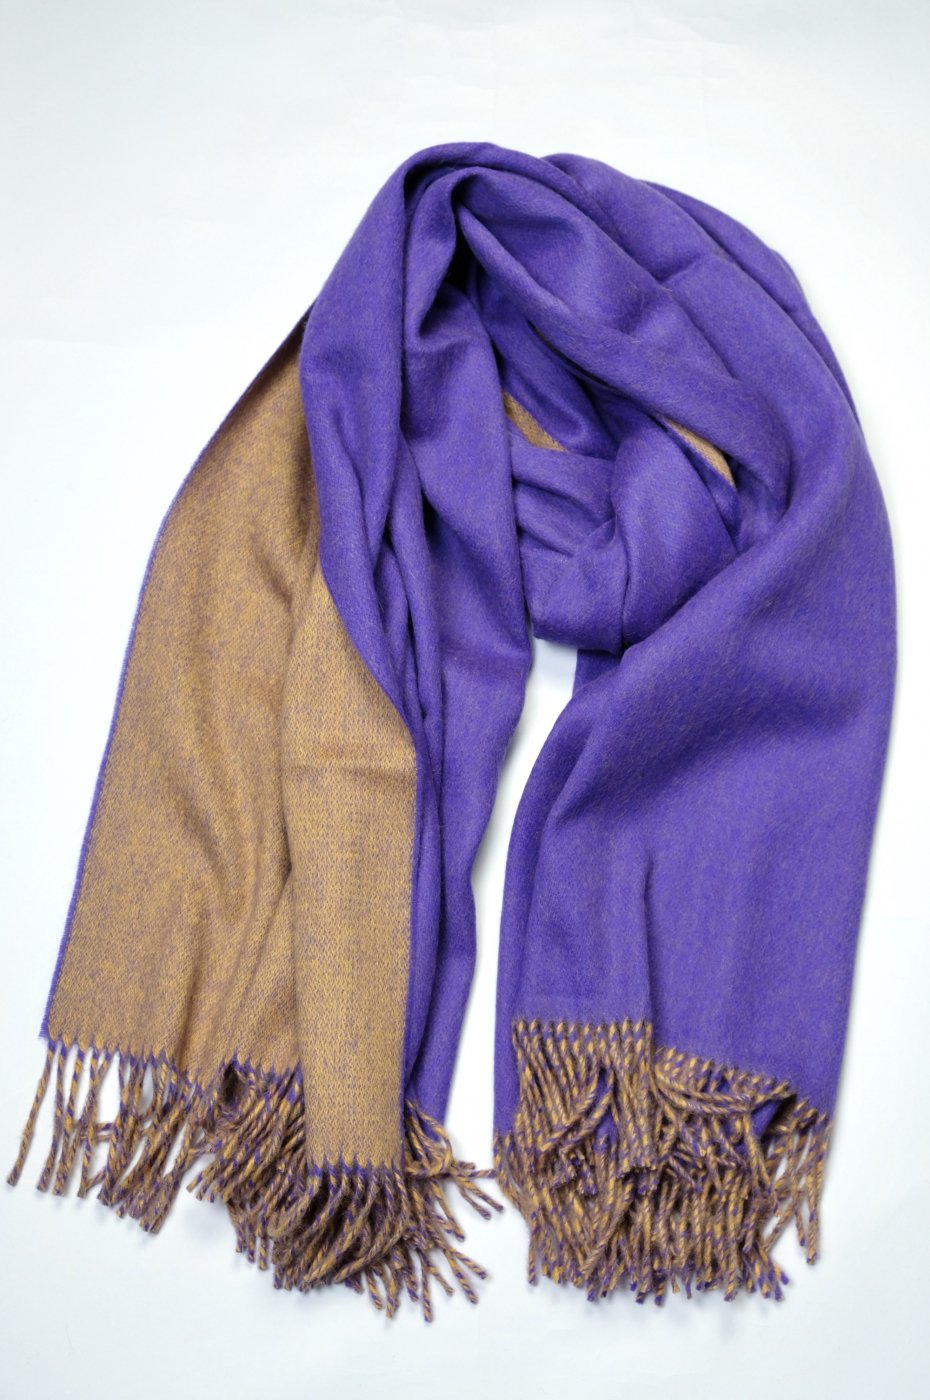 THE INOUE BROTHERS... "DOUBLE FACED LARGE BRUSHED STOLE / PURPLE×YELLOW"